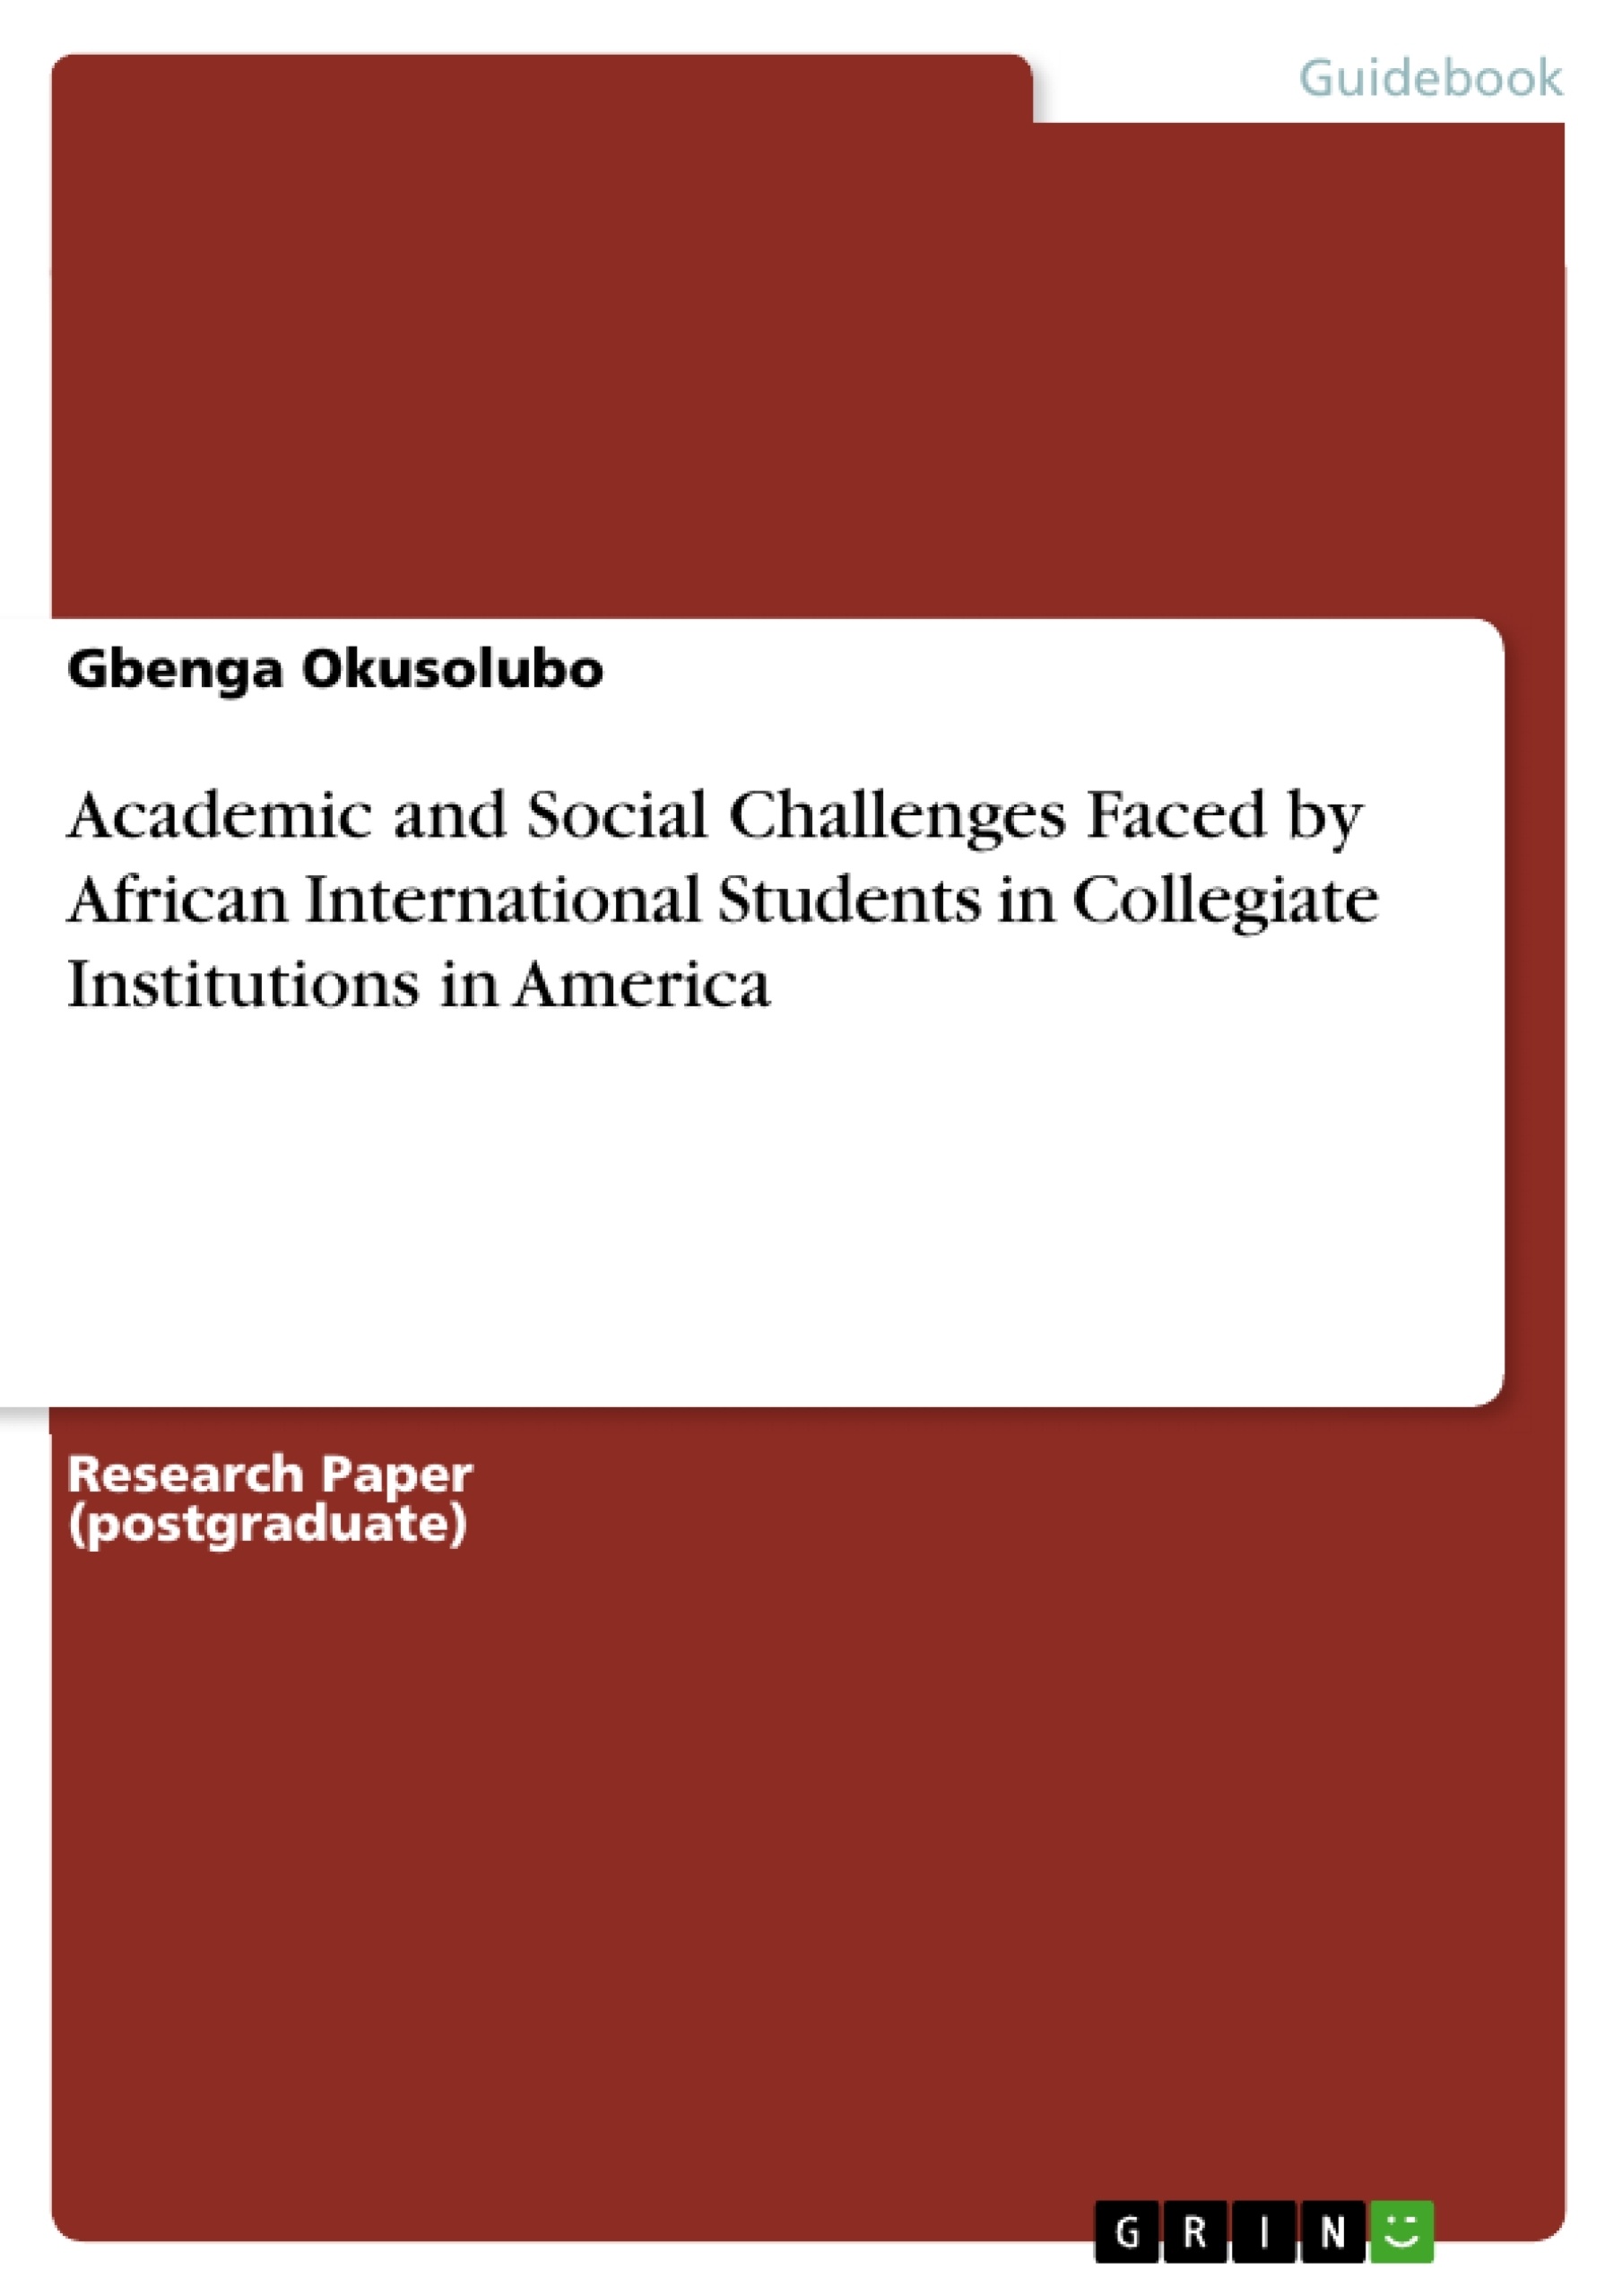 Titel: Academic and Social Challenges Faced by African International Students in Collegiate Institutions in America